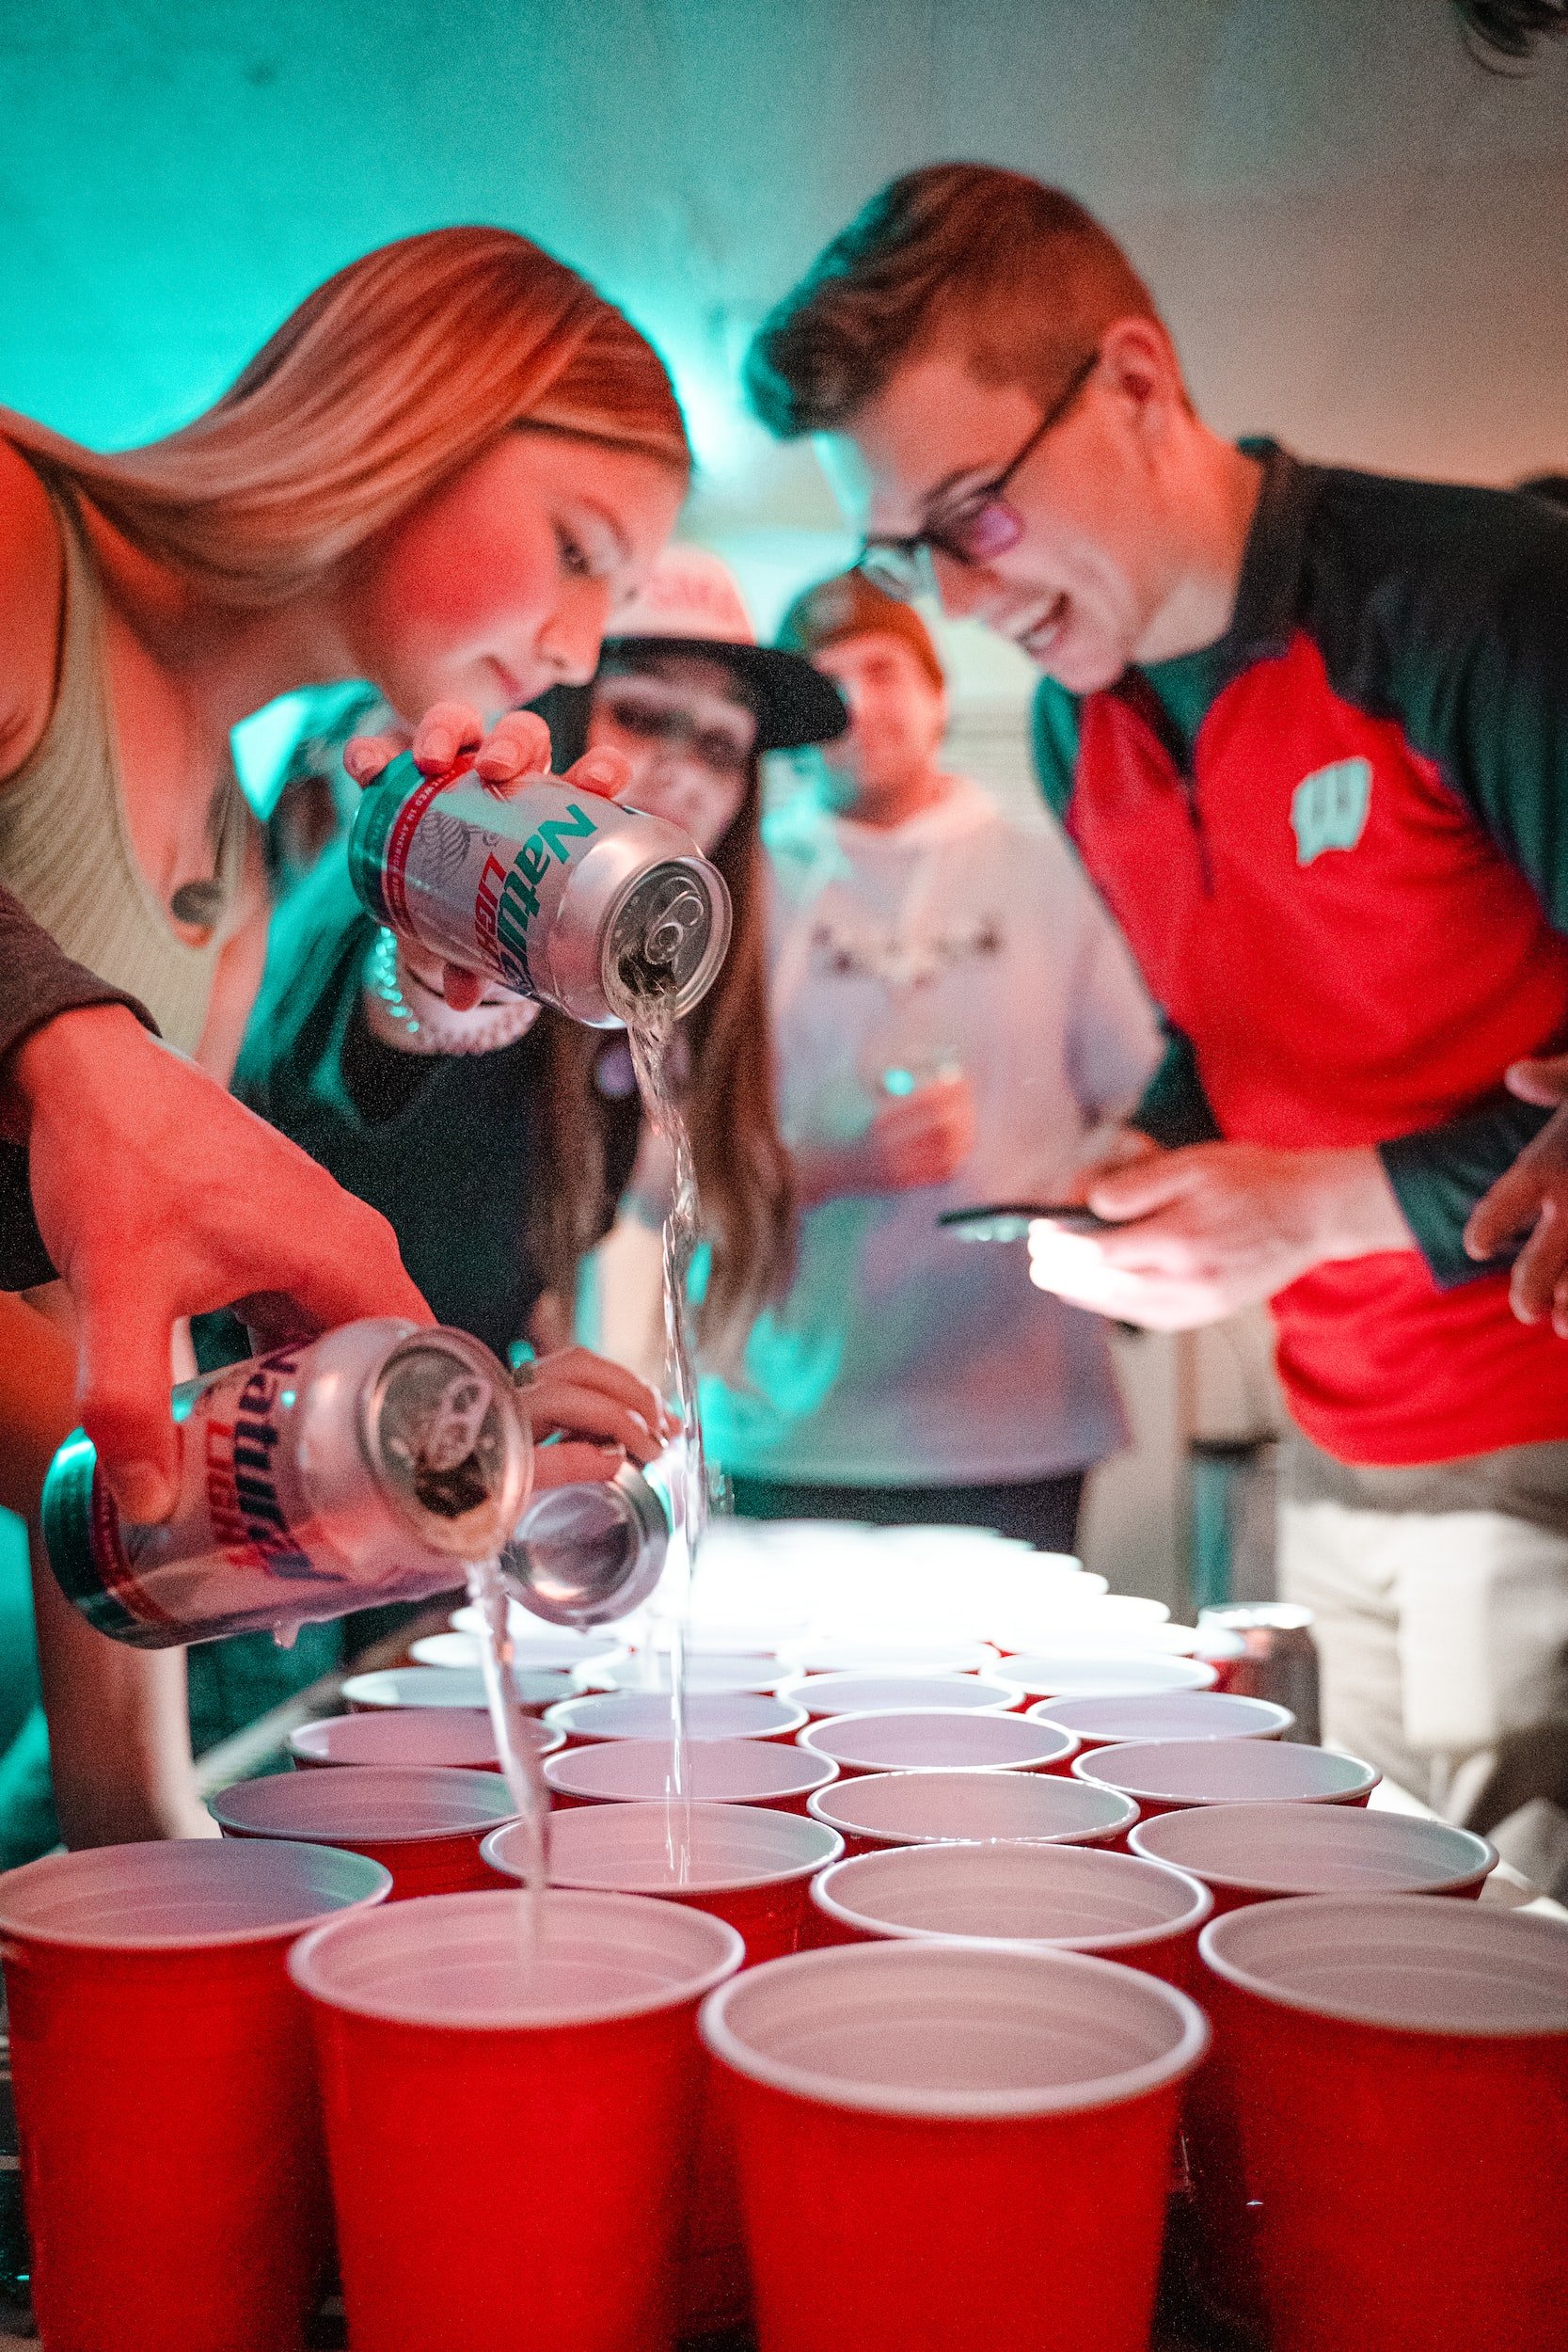 The Top College Party Games and Their Legal Risks: Advice for